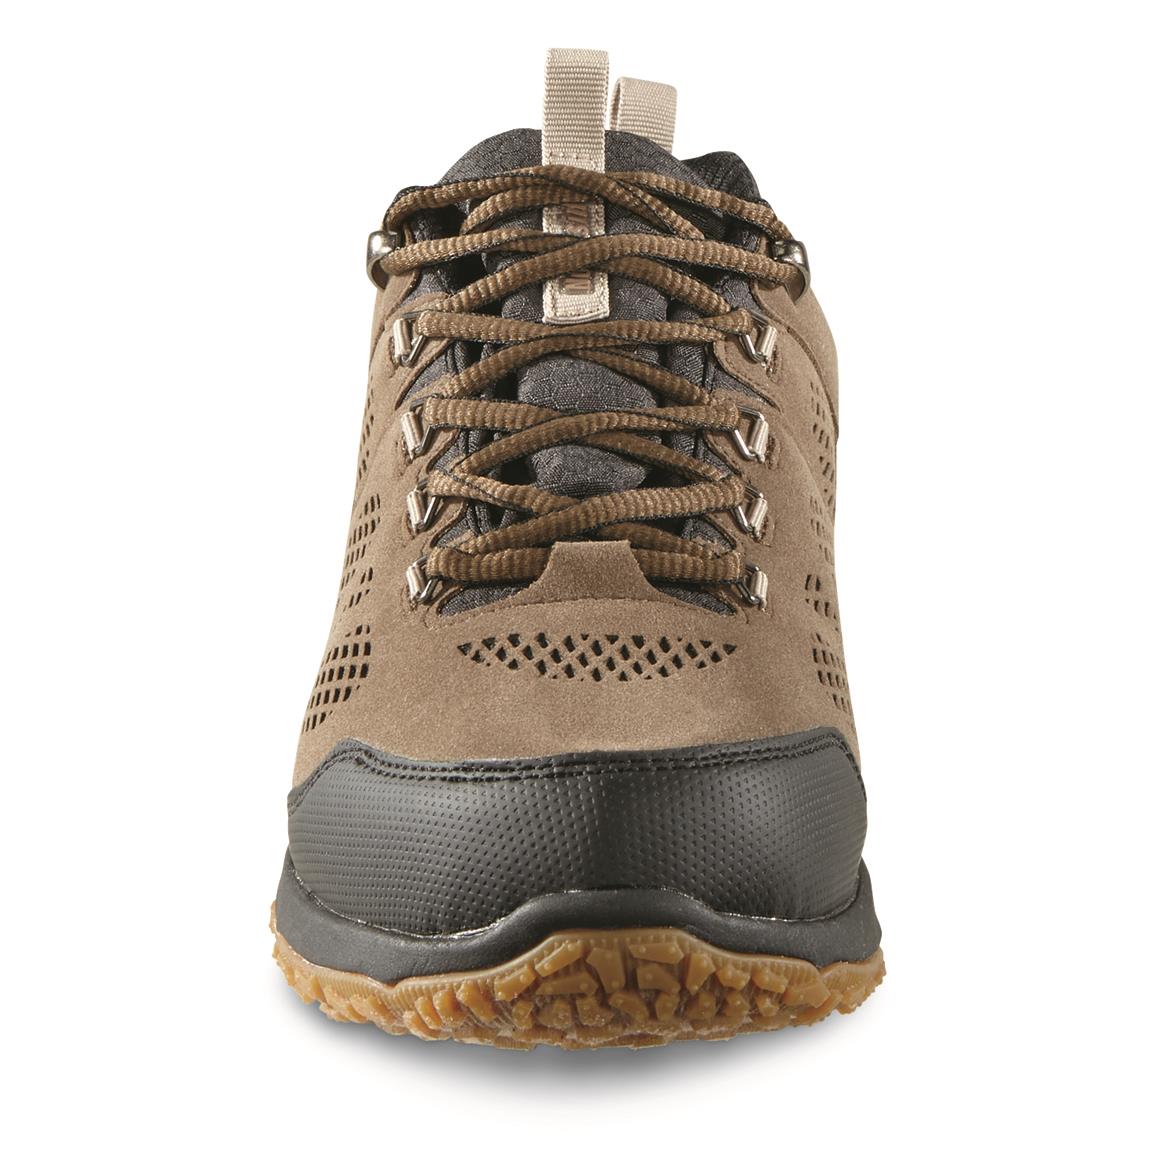 Brown Perforated Boots | Sportsman's Guide